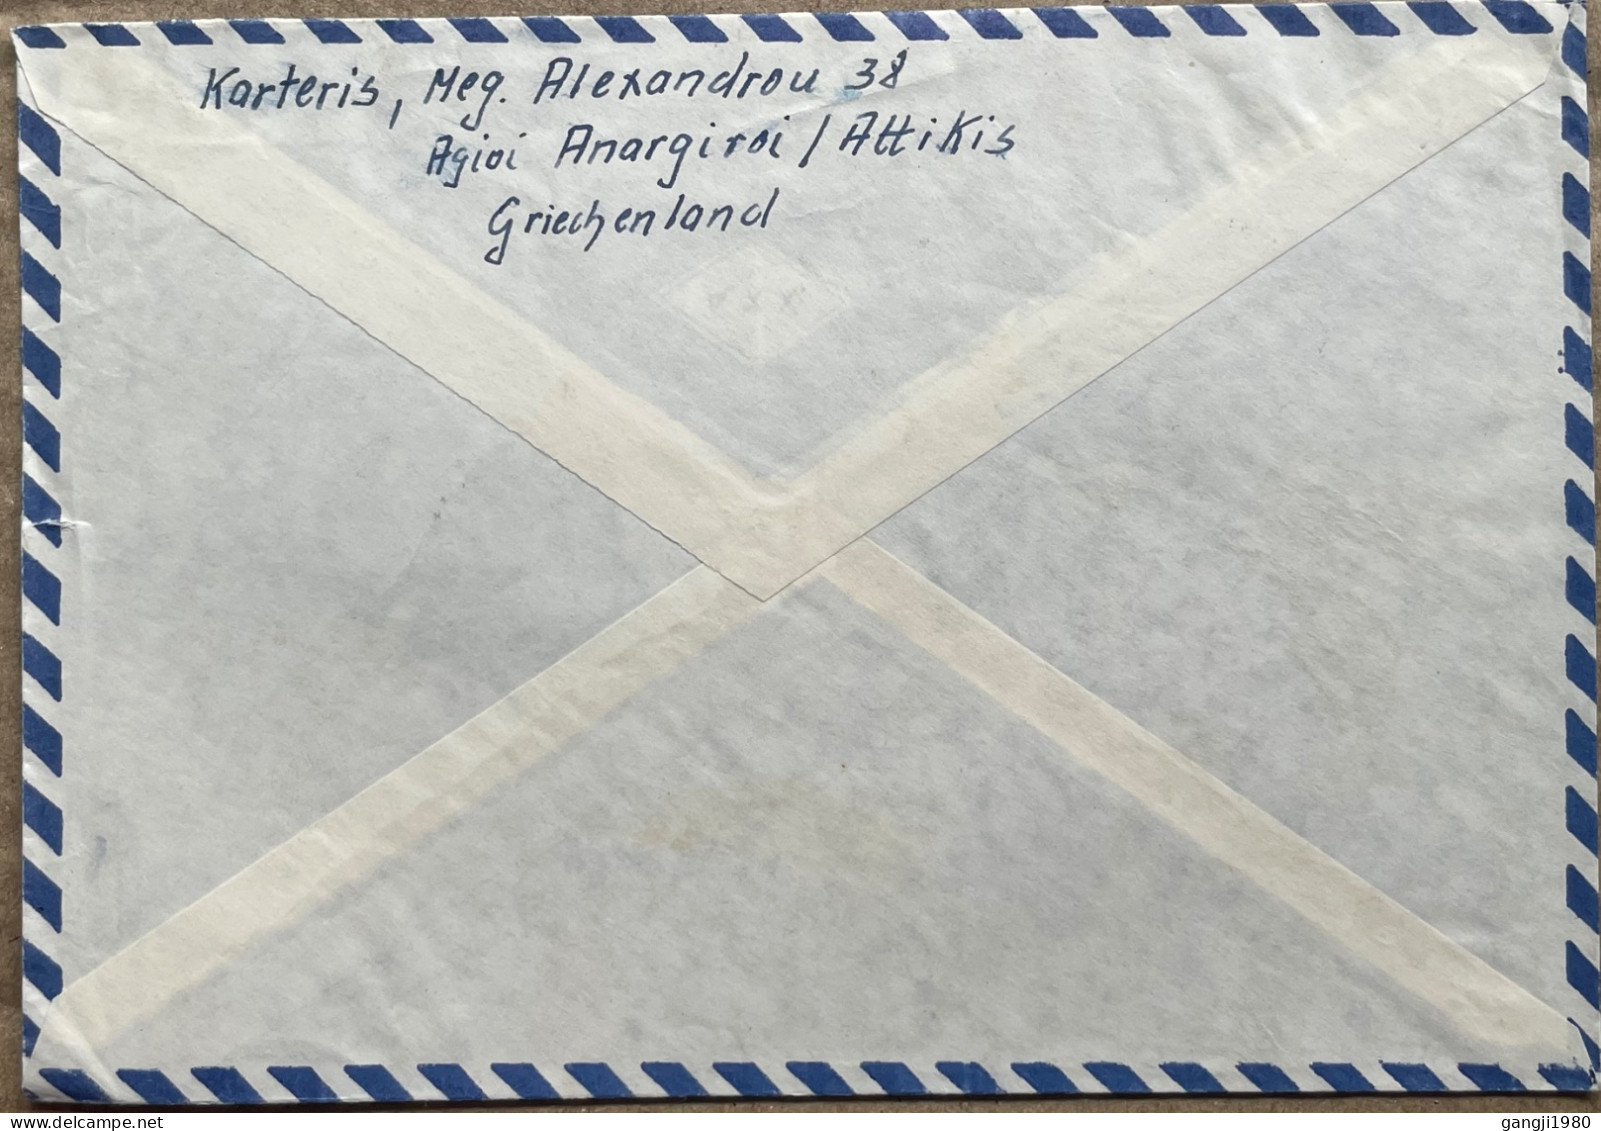 GREECE 1968, COVER USED TO GERMANY, BOXED RETURN FOR PAYMENT OF RE MAILING, 3 DIFF STAMP, RHODE MONUMENT, AIR FORCE AIRC - Lettres & Documents